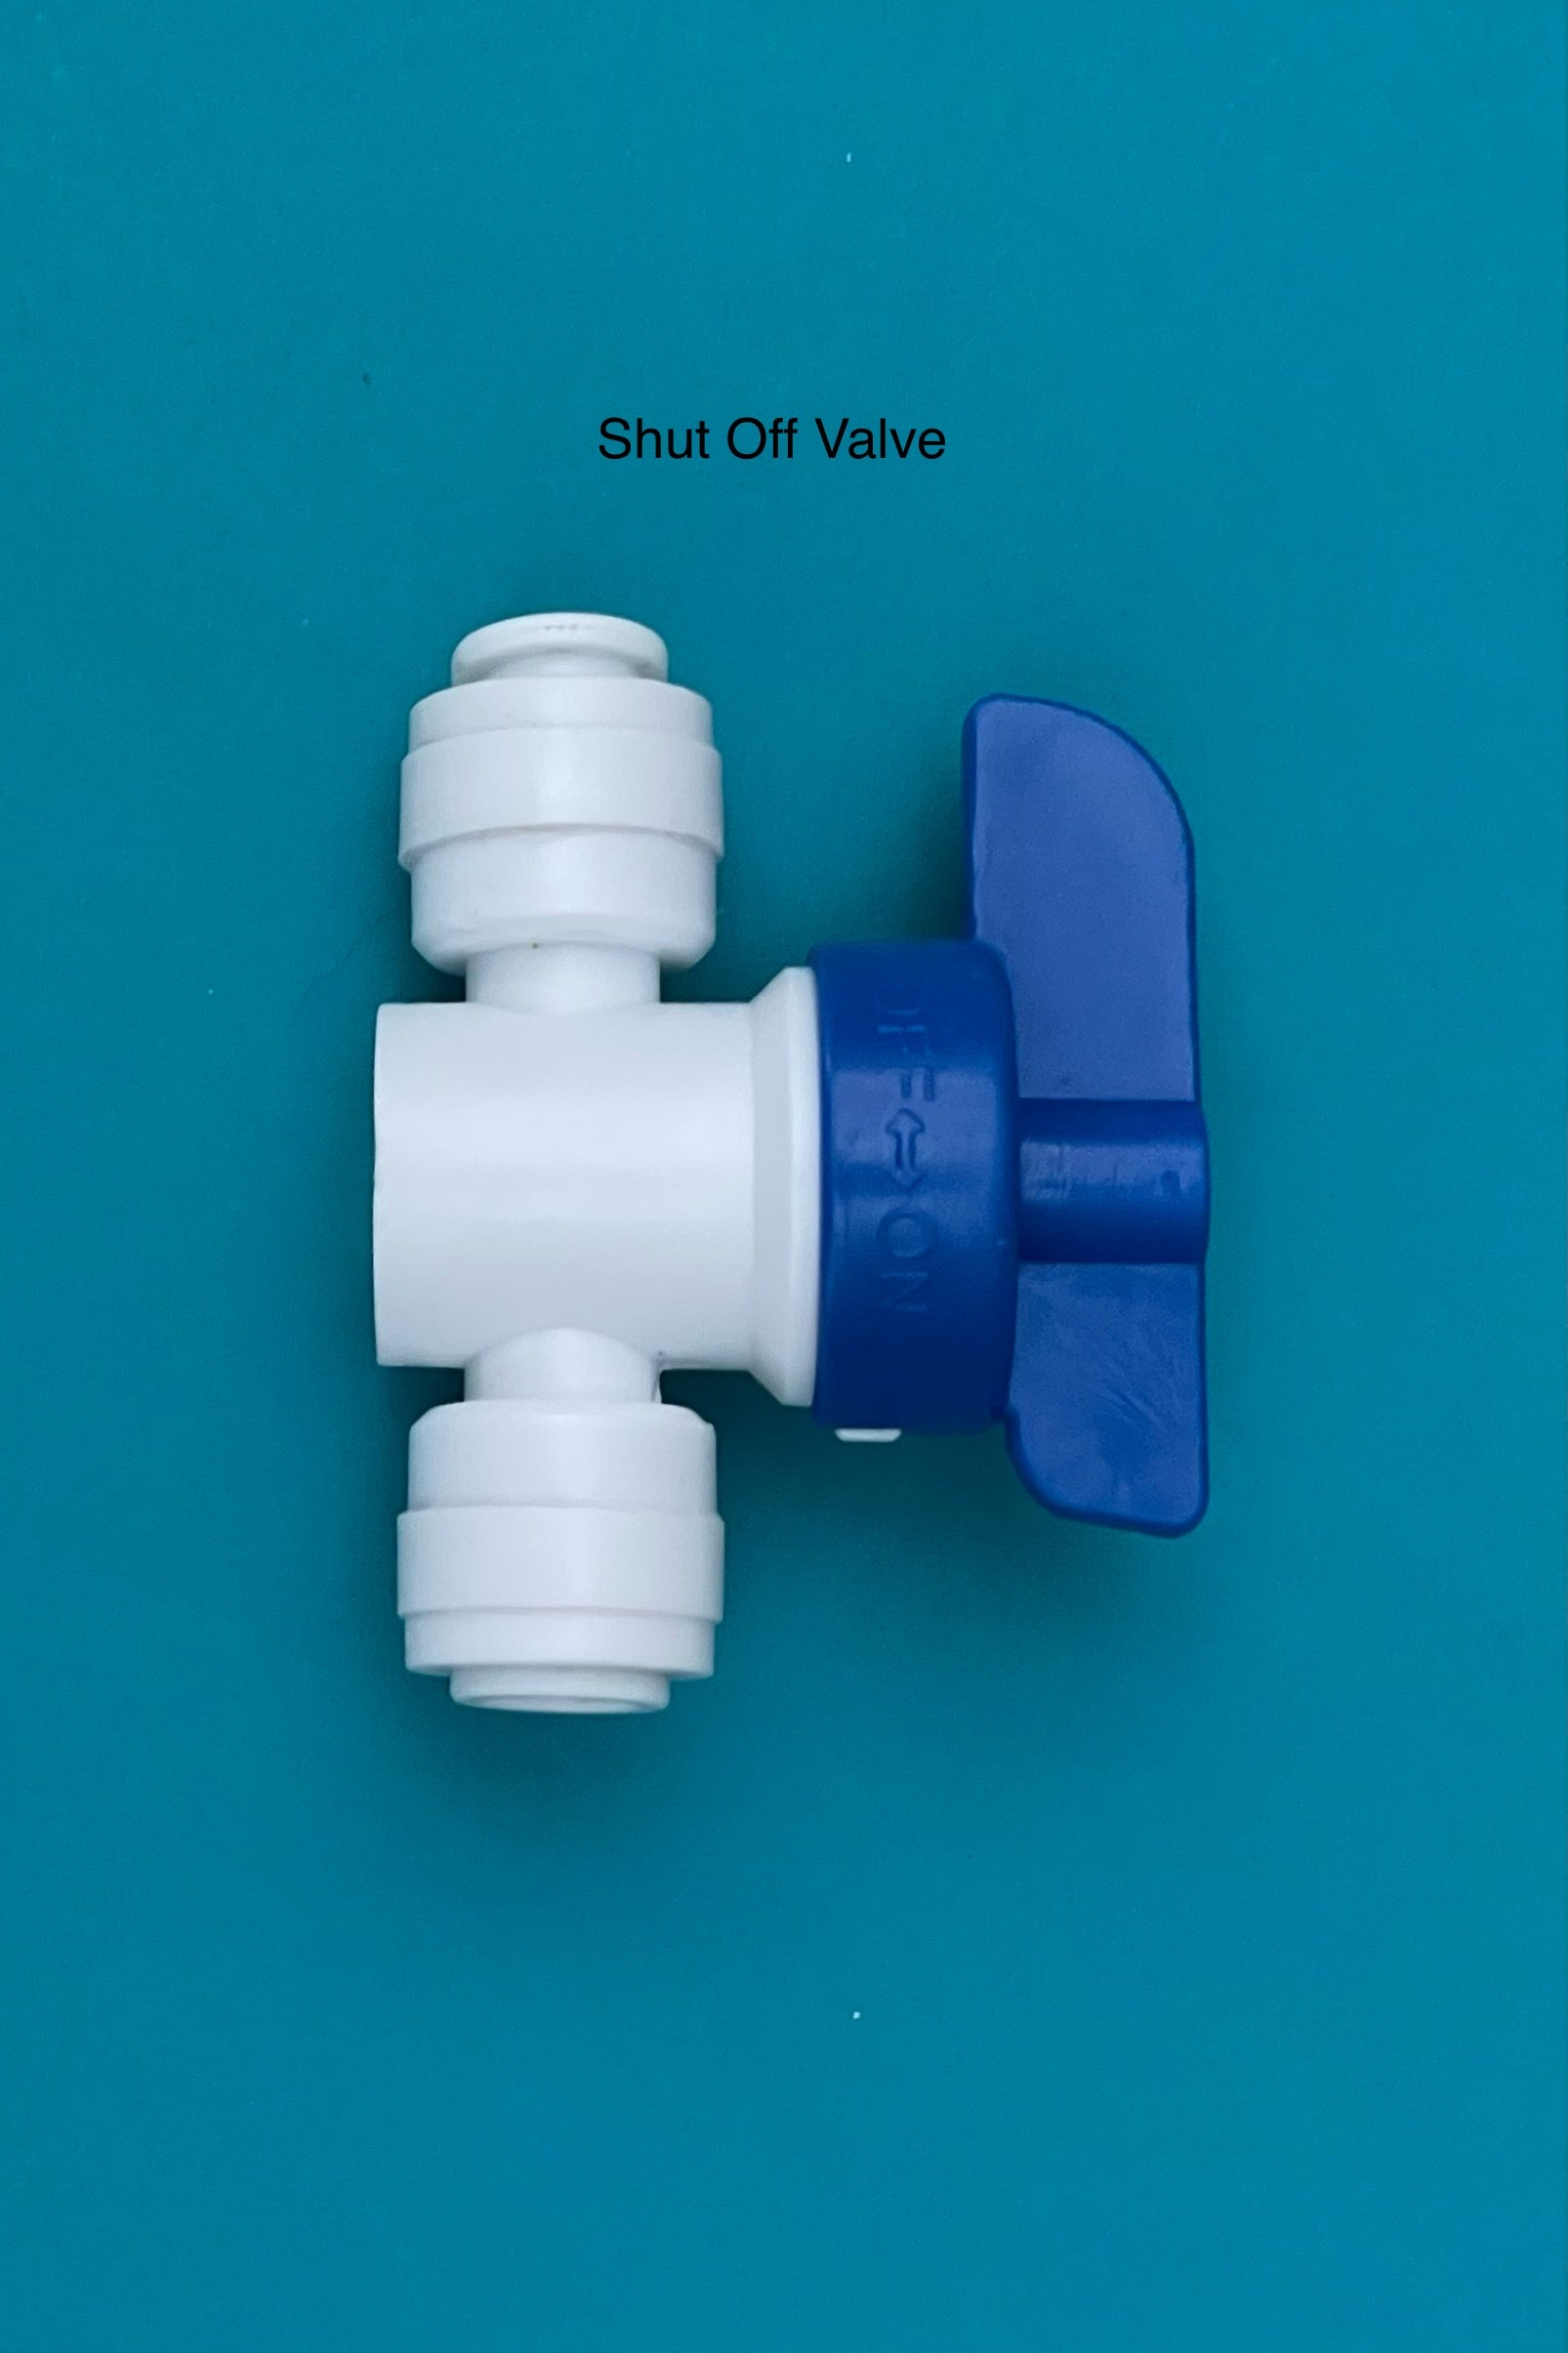 One 1/4" Shut Off Valve. White Plastic with blue handle